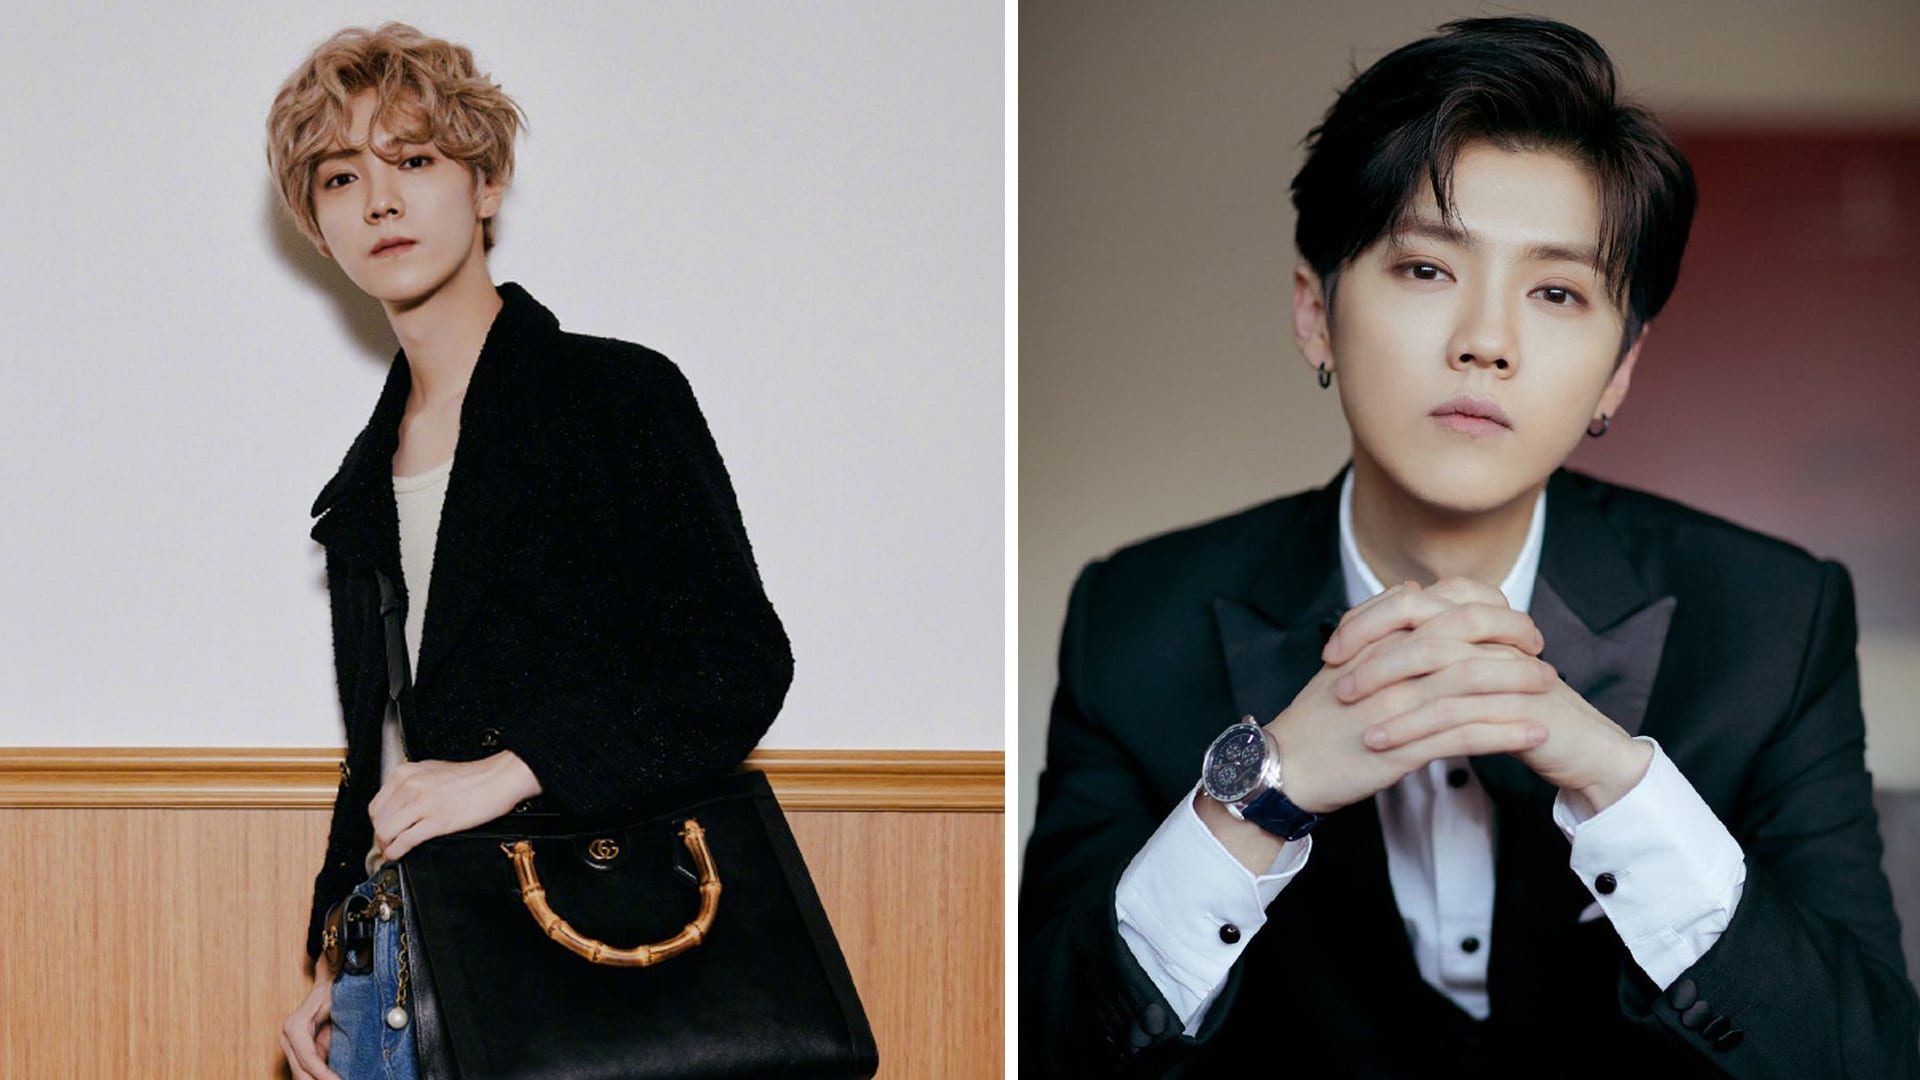 Chinese Star Lu Han Cuts Ties With Audemars Piguet After CEO Calls Taiwan A "Country"